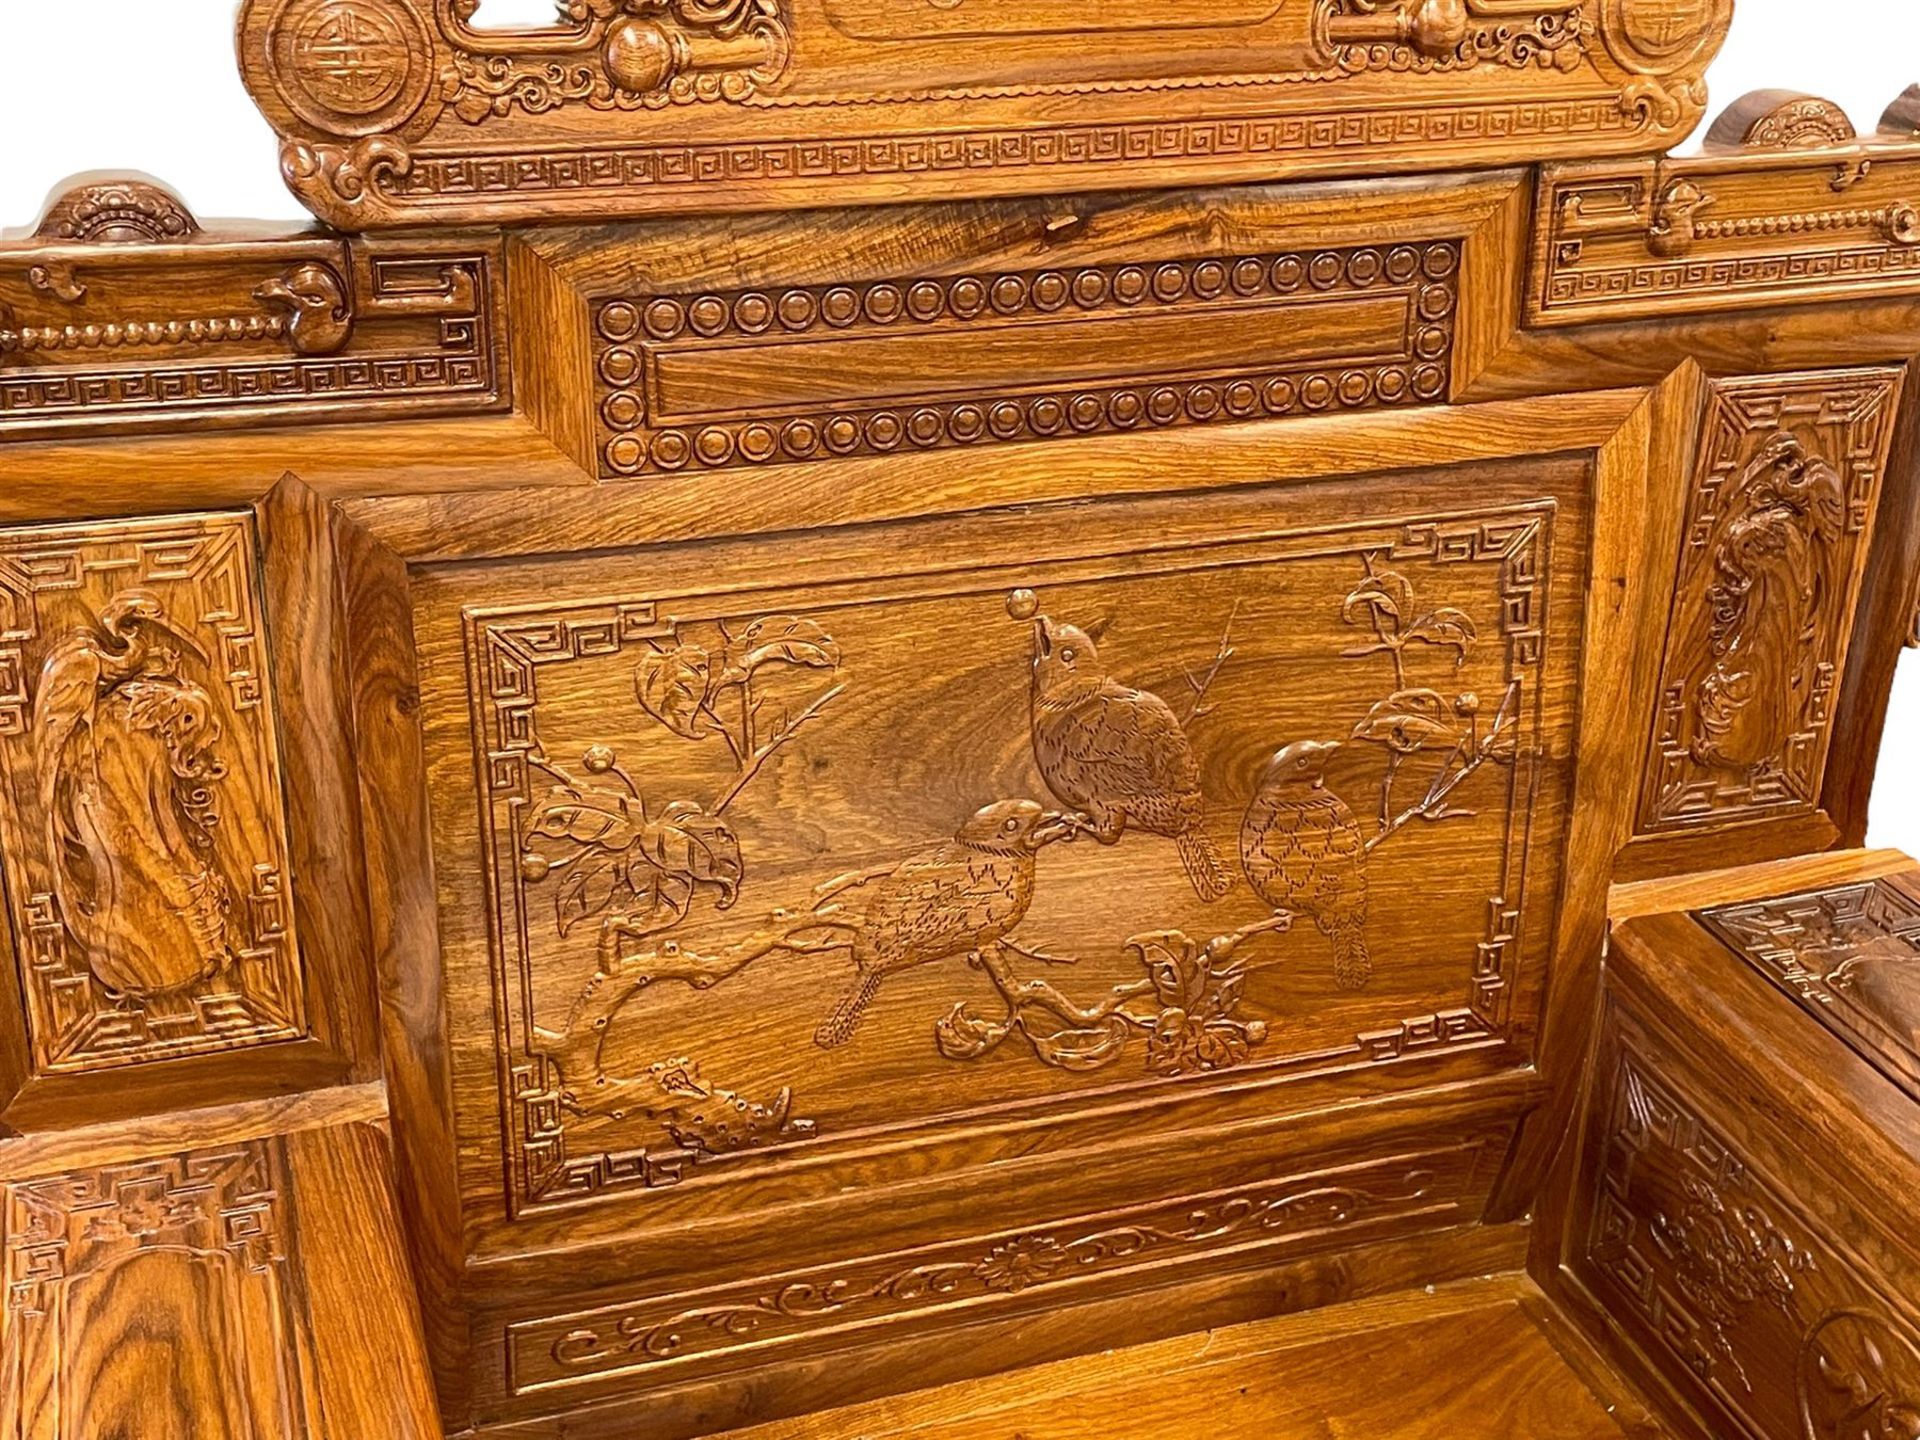 A Pair Chinese Imperial Style Hardwood Throne Chairs, The Backs Carved With Dragon Masks And Birds - Image 14 of 20